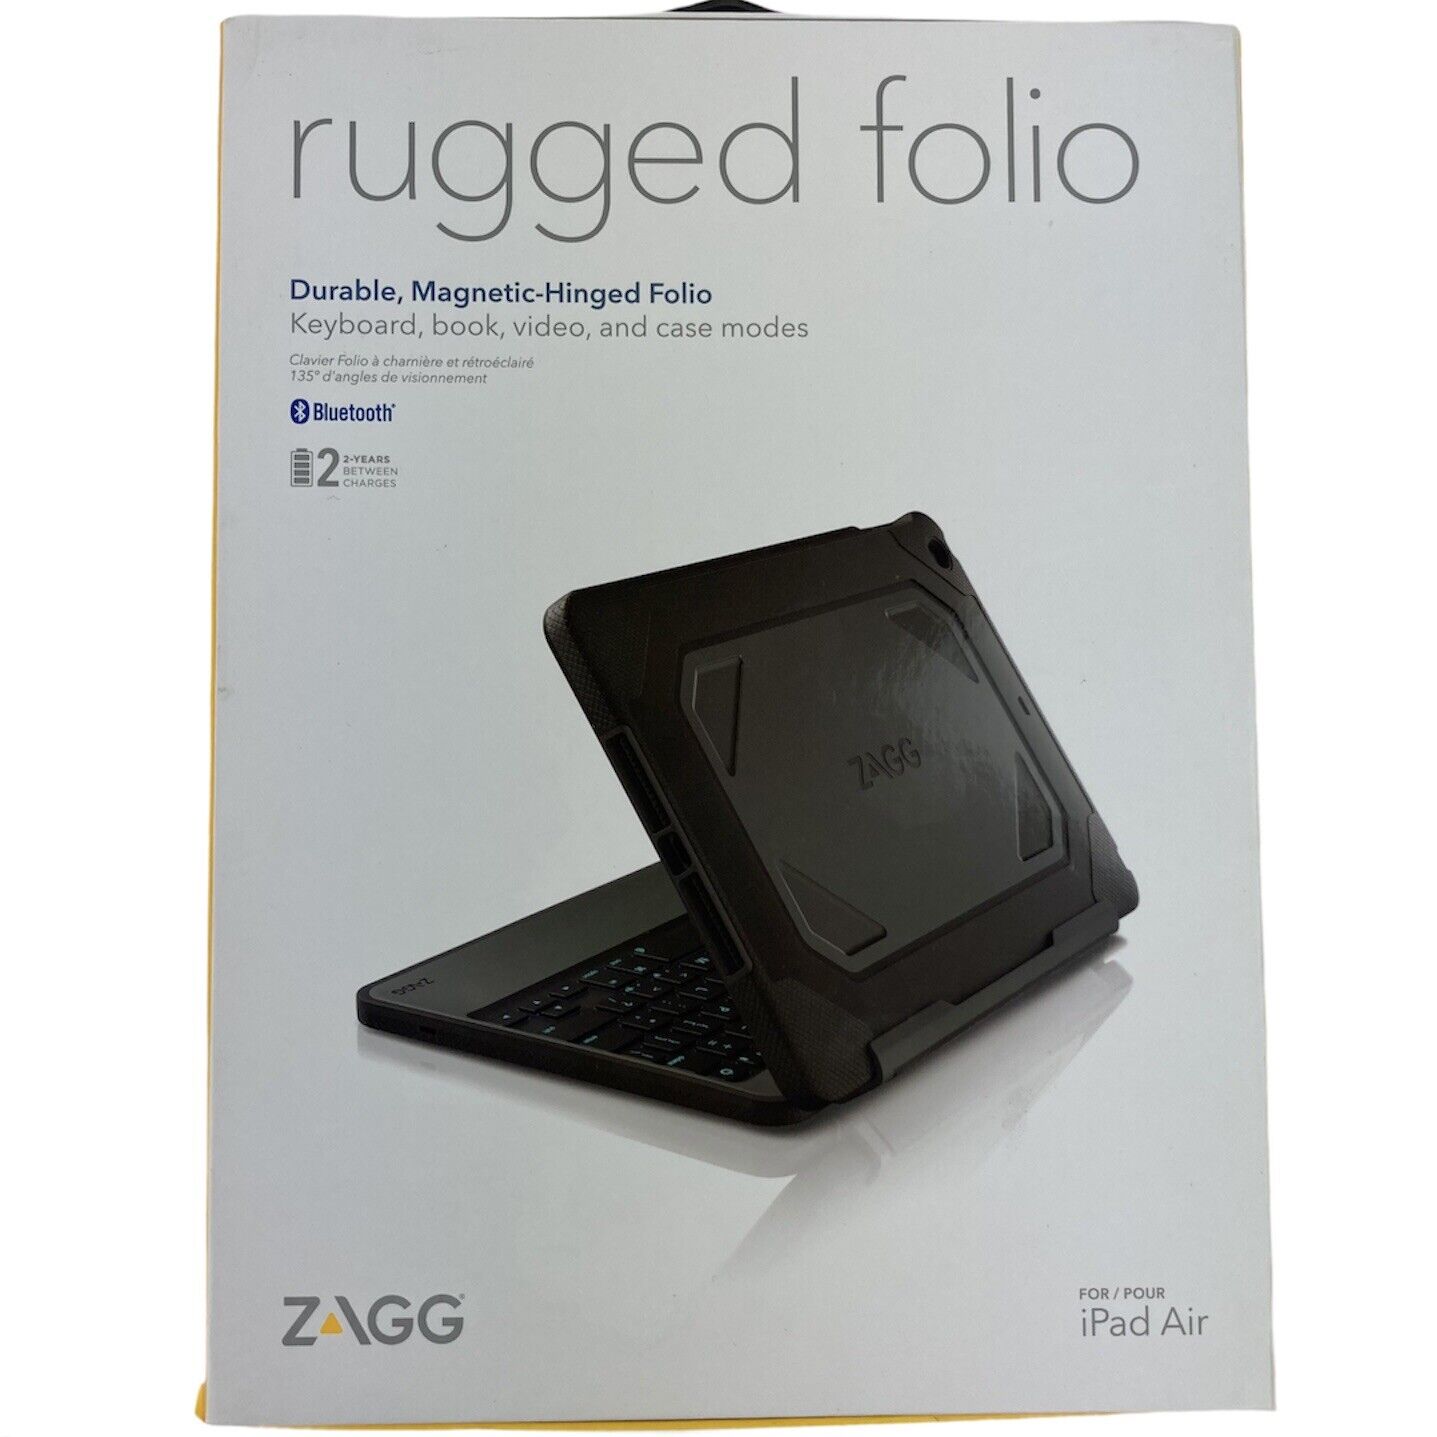 NEW ZAGG Rugged Folio Book Keyboard and Case for iPad Air - Black FREE SHIPPING